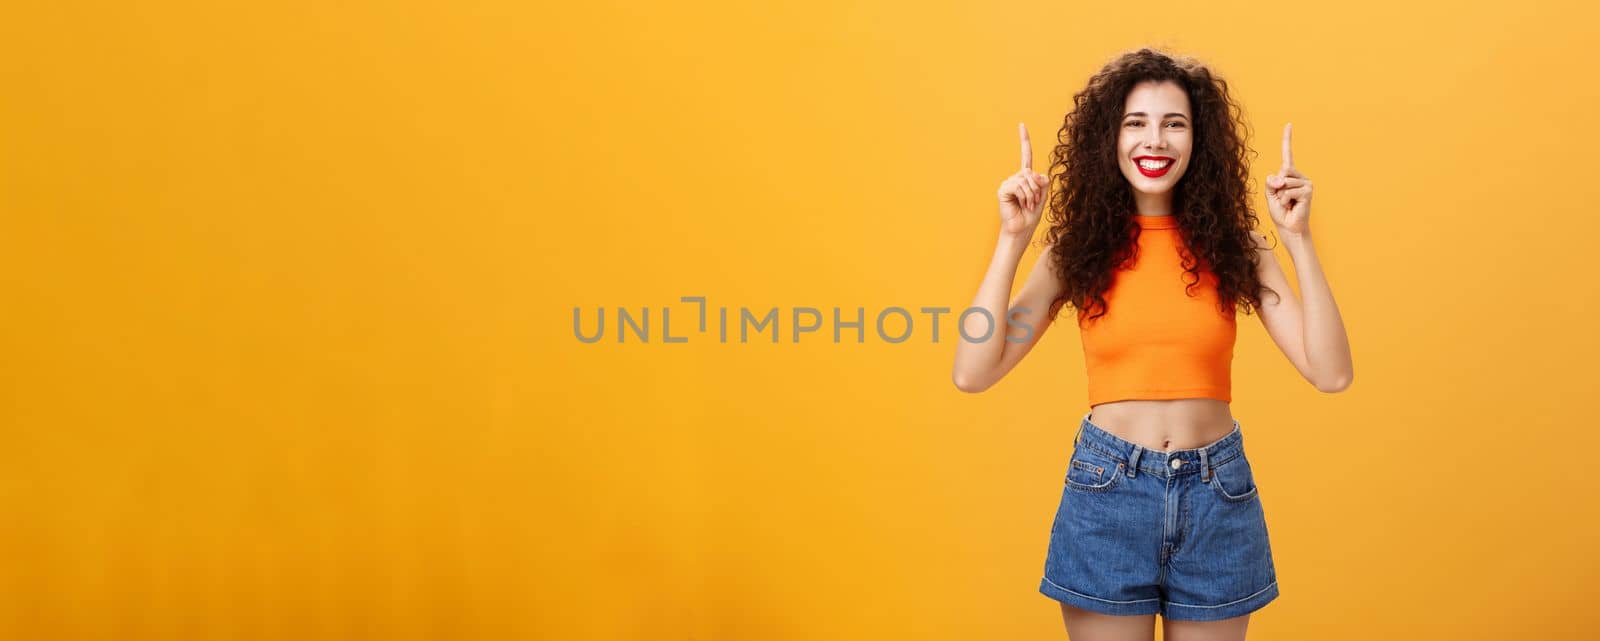 Indoor shot of friendly and cute happy relaxed female with red lipstick and curly hairstyle wearing cool cropped top and denim shorts smiling broadly pointing up posing over orange background. Copy space